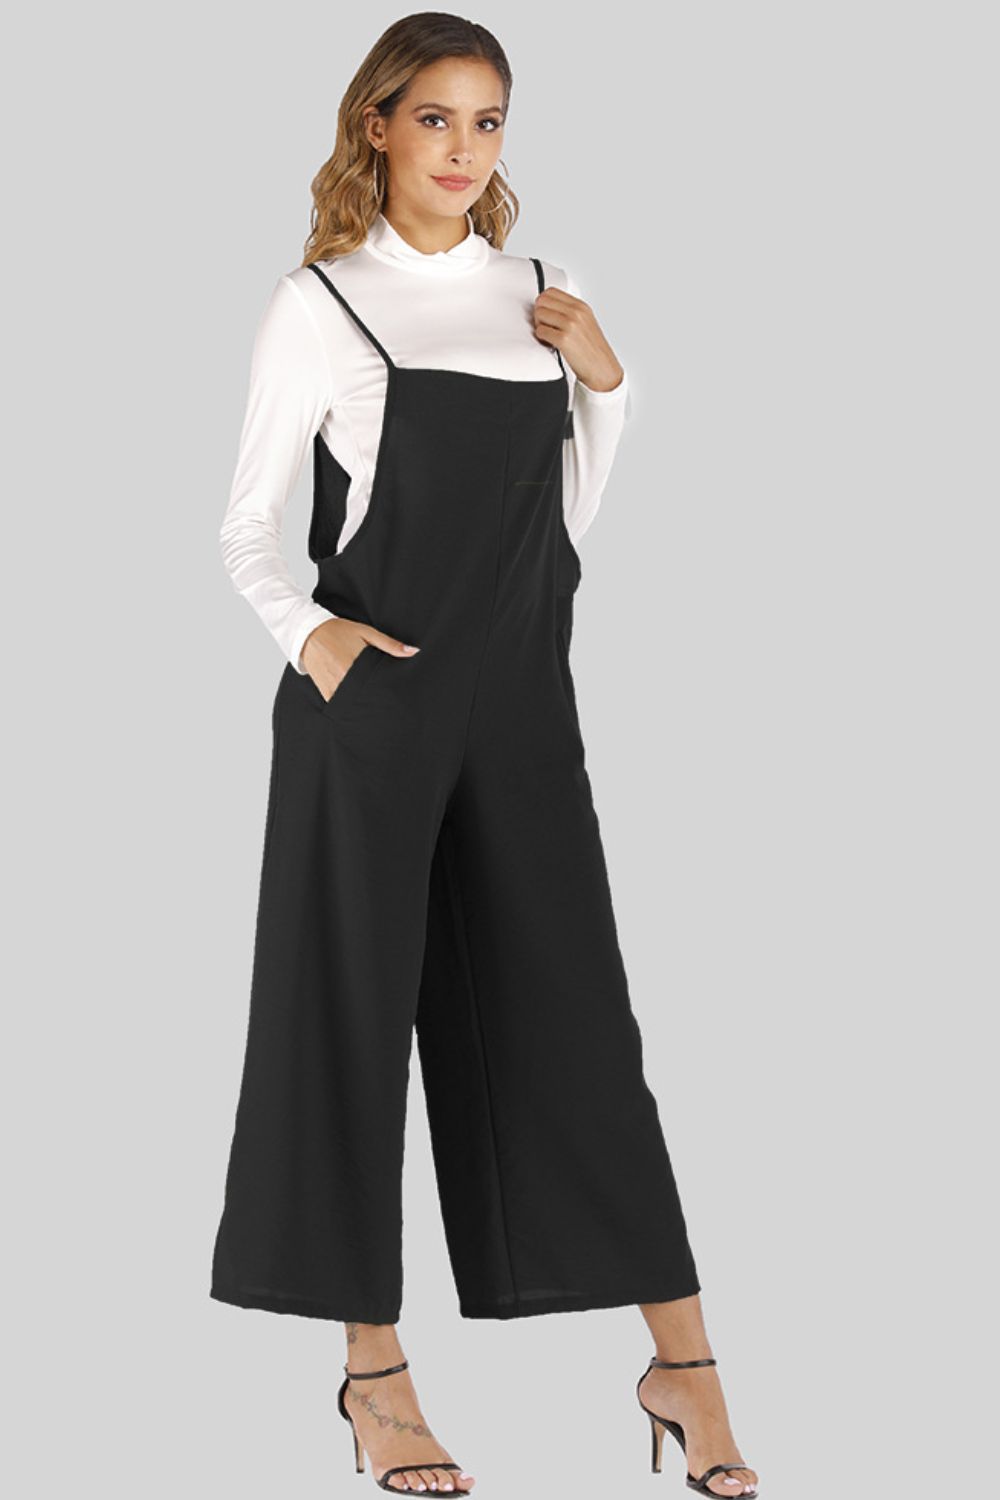 Ophelia Overalls | 3 colors |